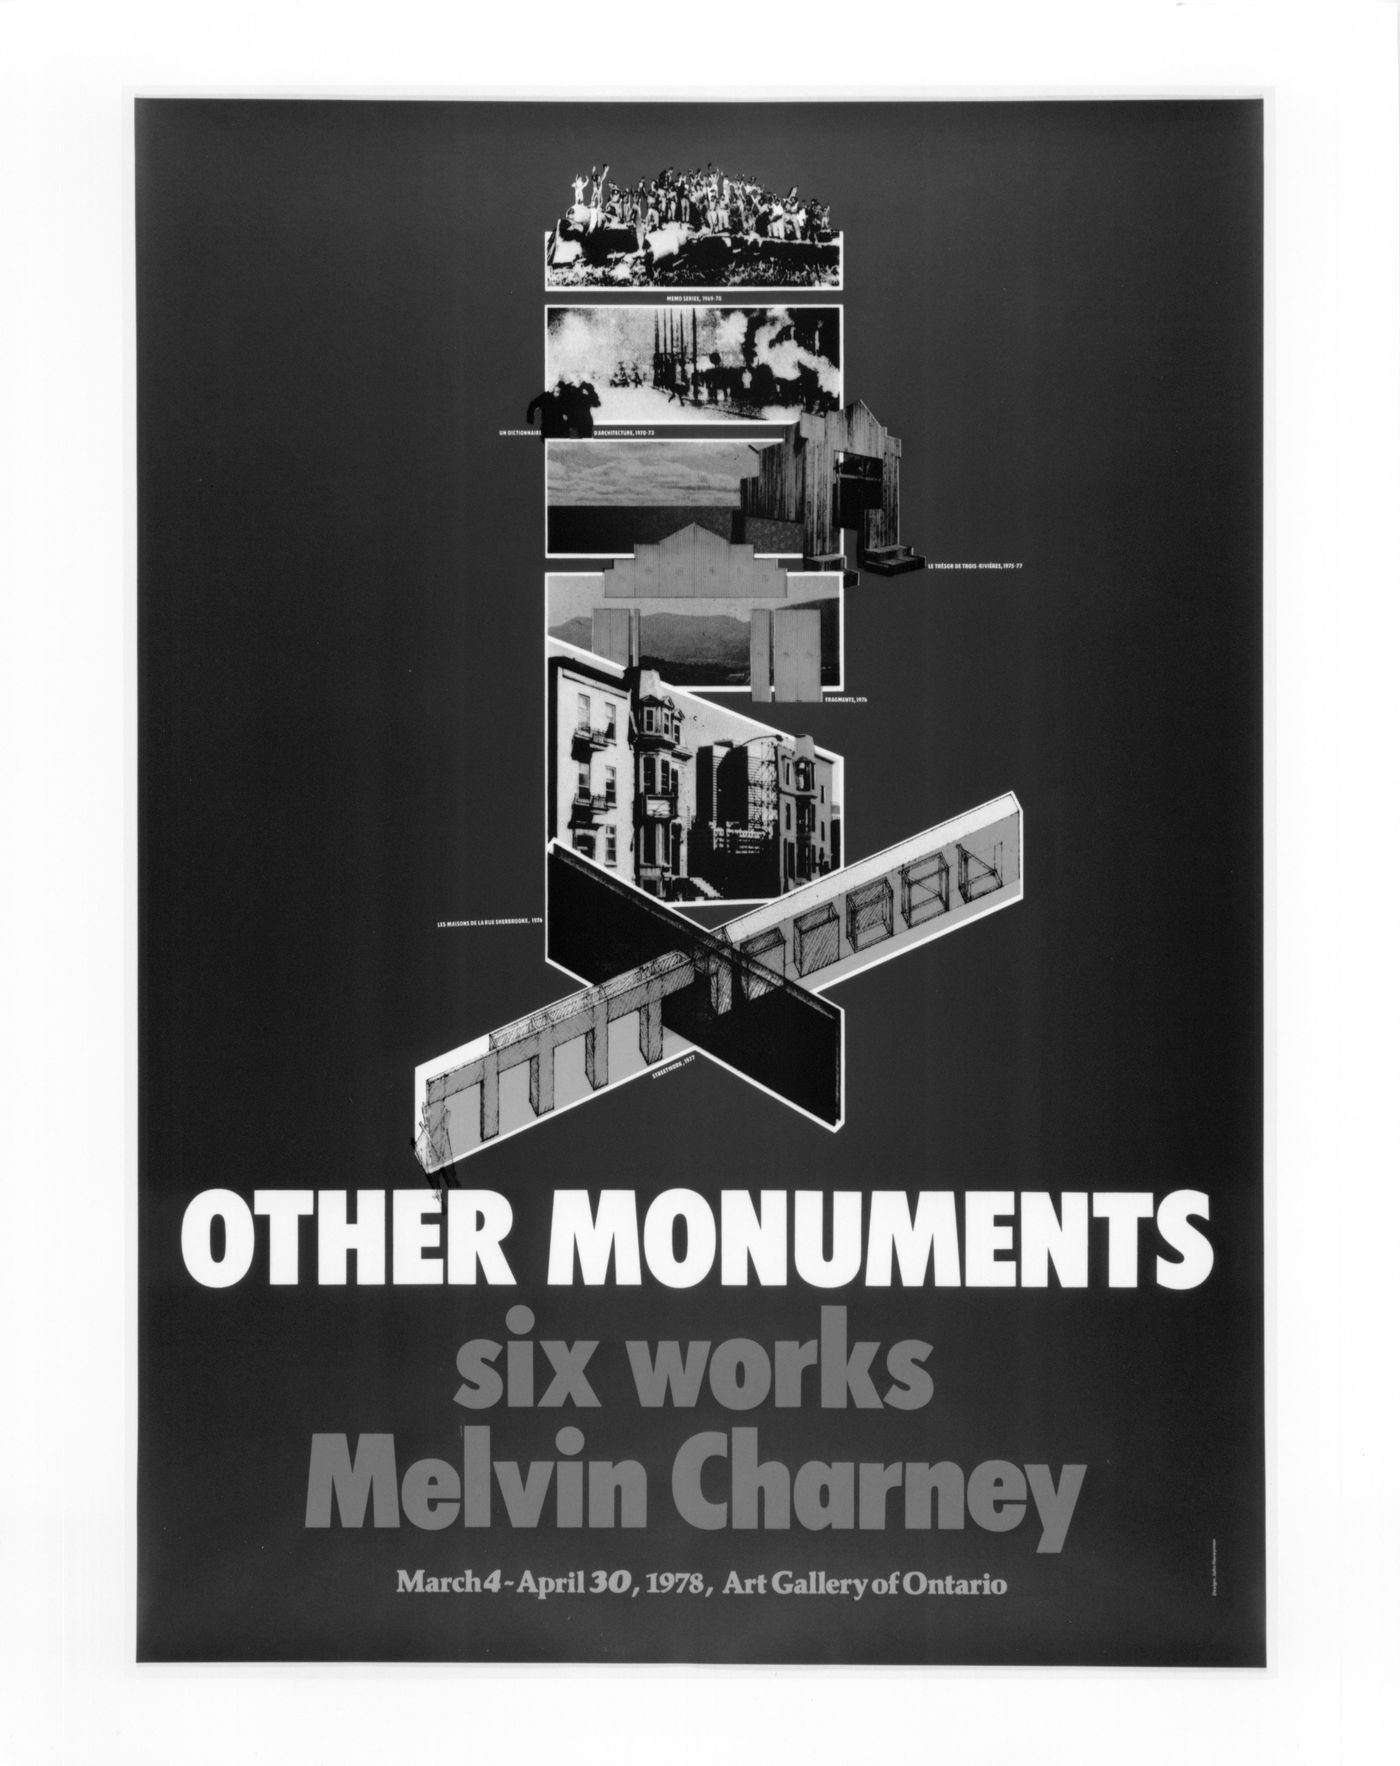 Poster of the exhibition "Other monuments"